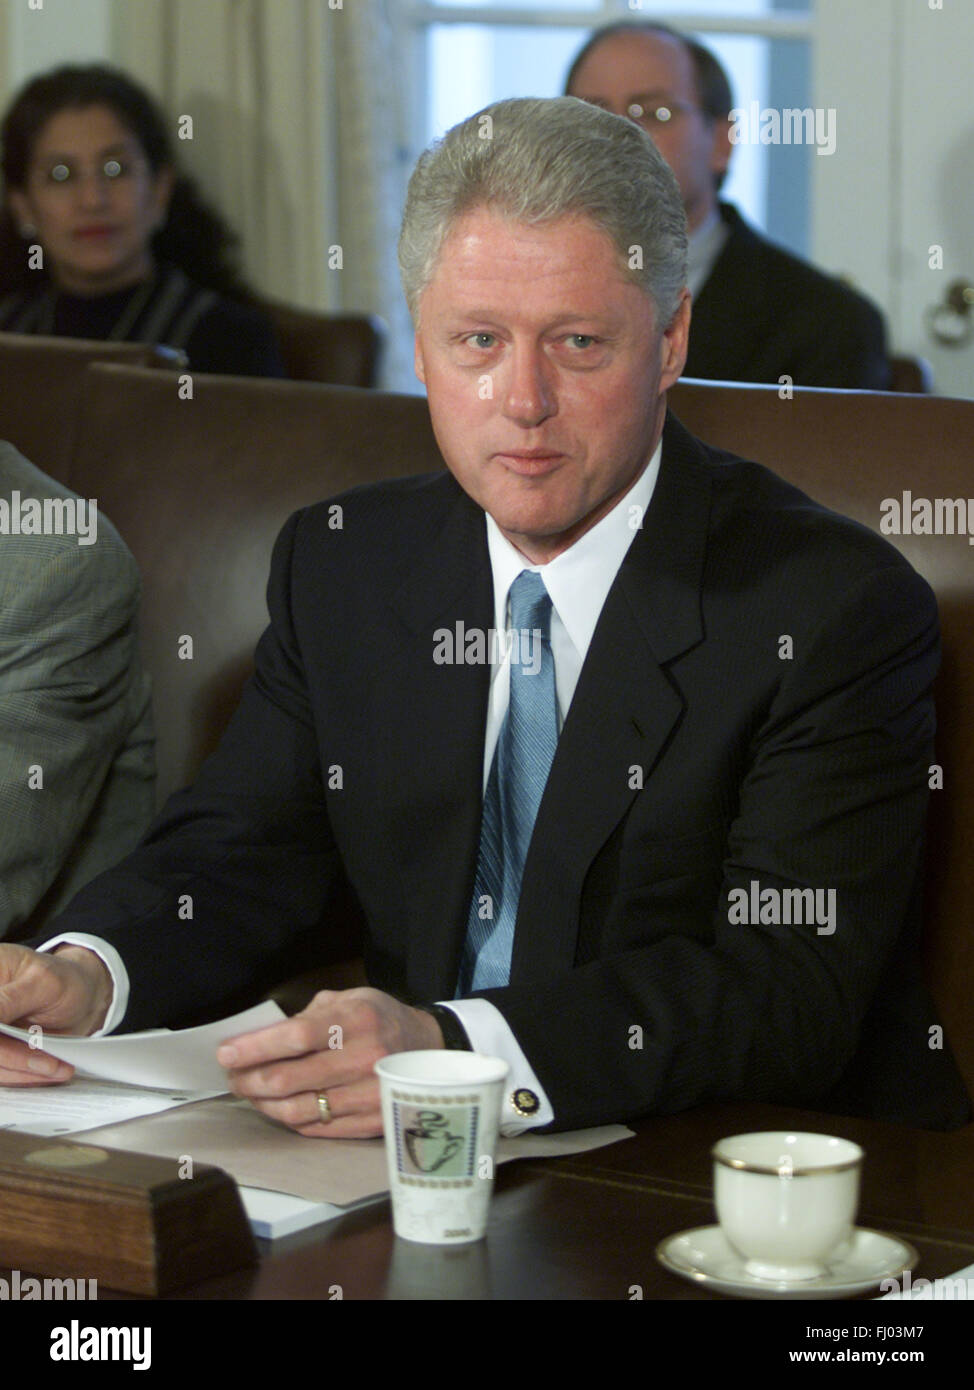 United States President Bill Clinton makes remarks during a cabinet meeting at the White House in Washington, DC on November 27, 2000. Credit: Mark Wilson - Pool/CNP - NO WIRE SERVICE - Stock Photo